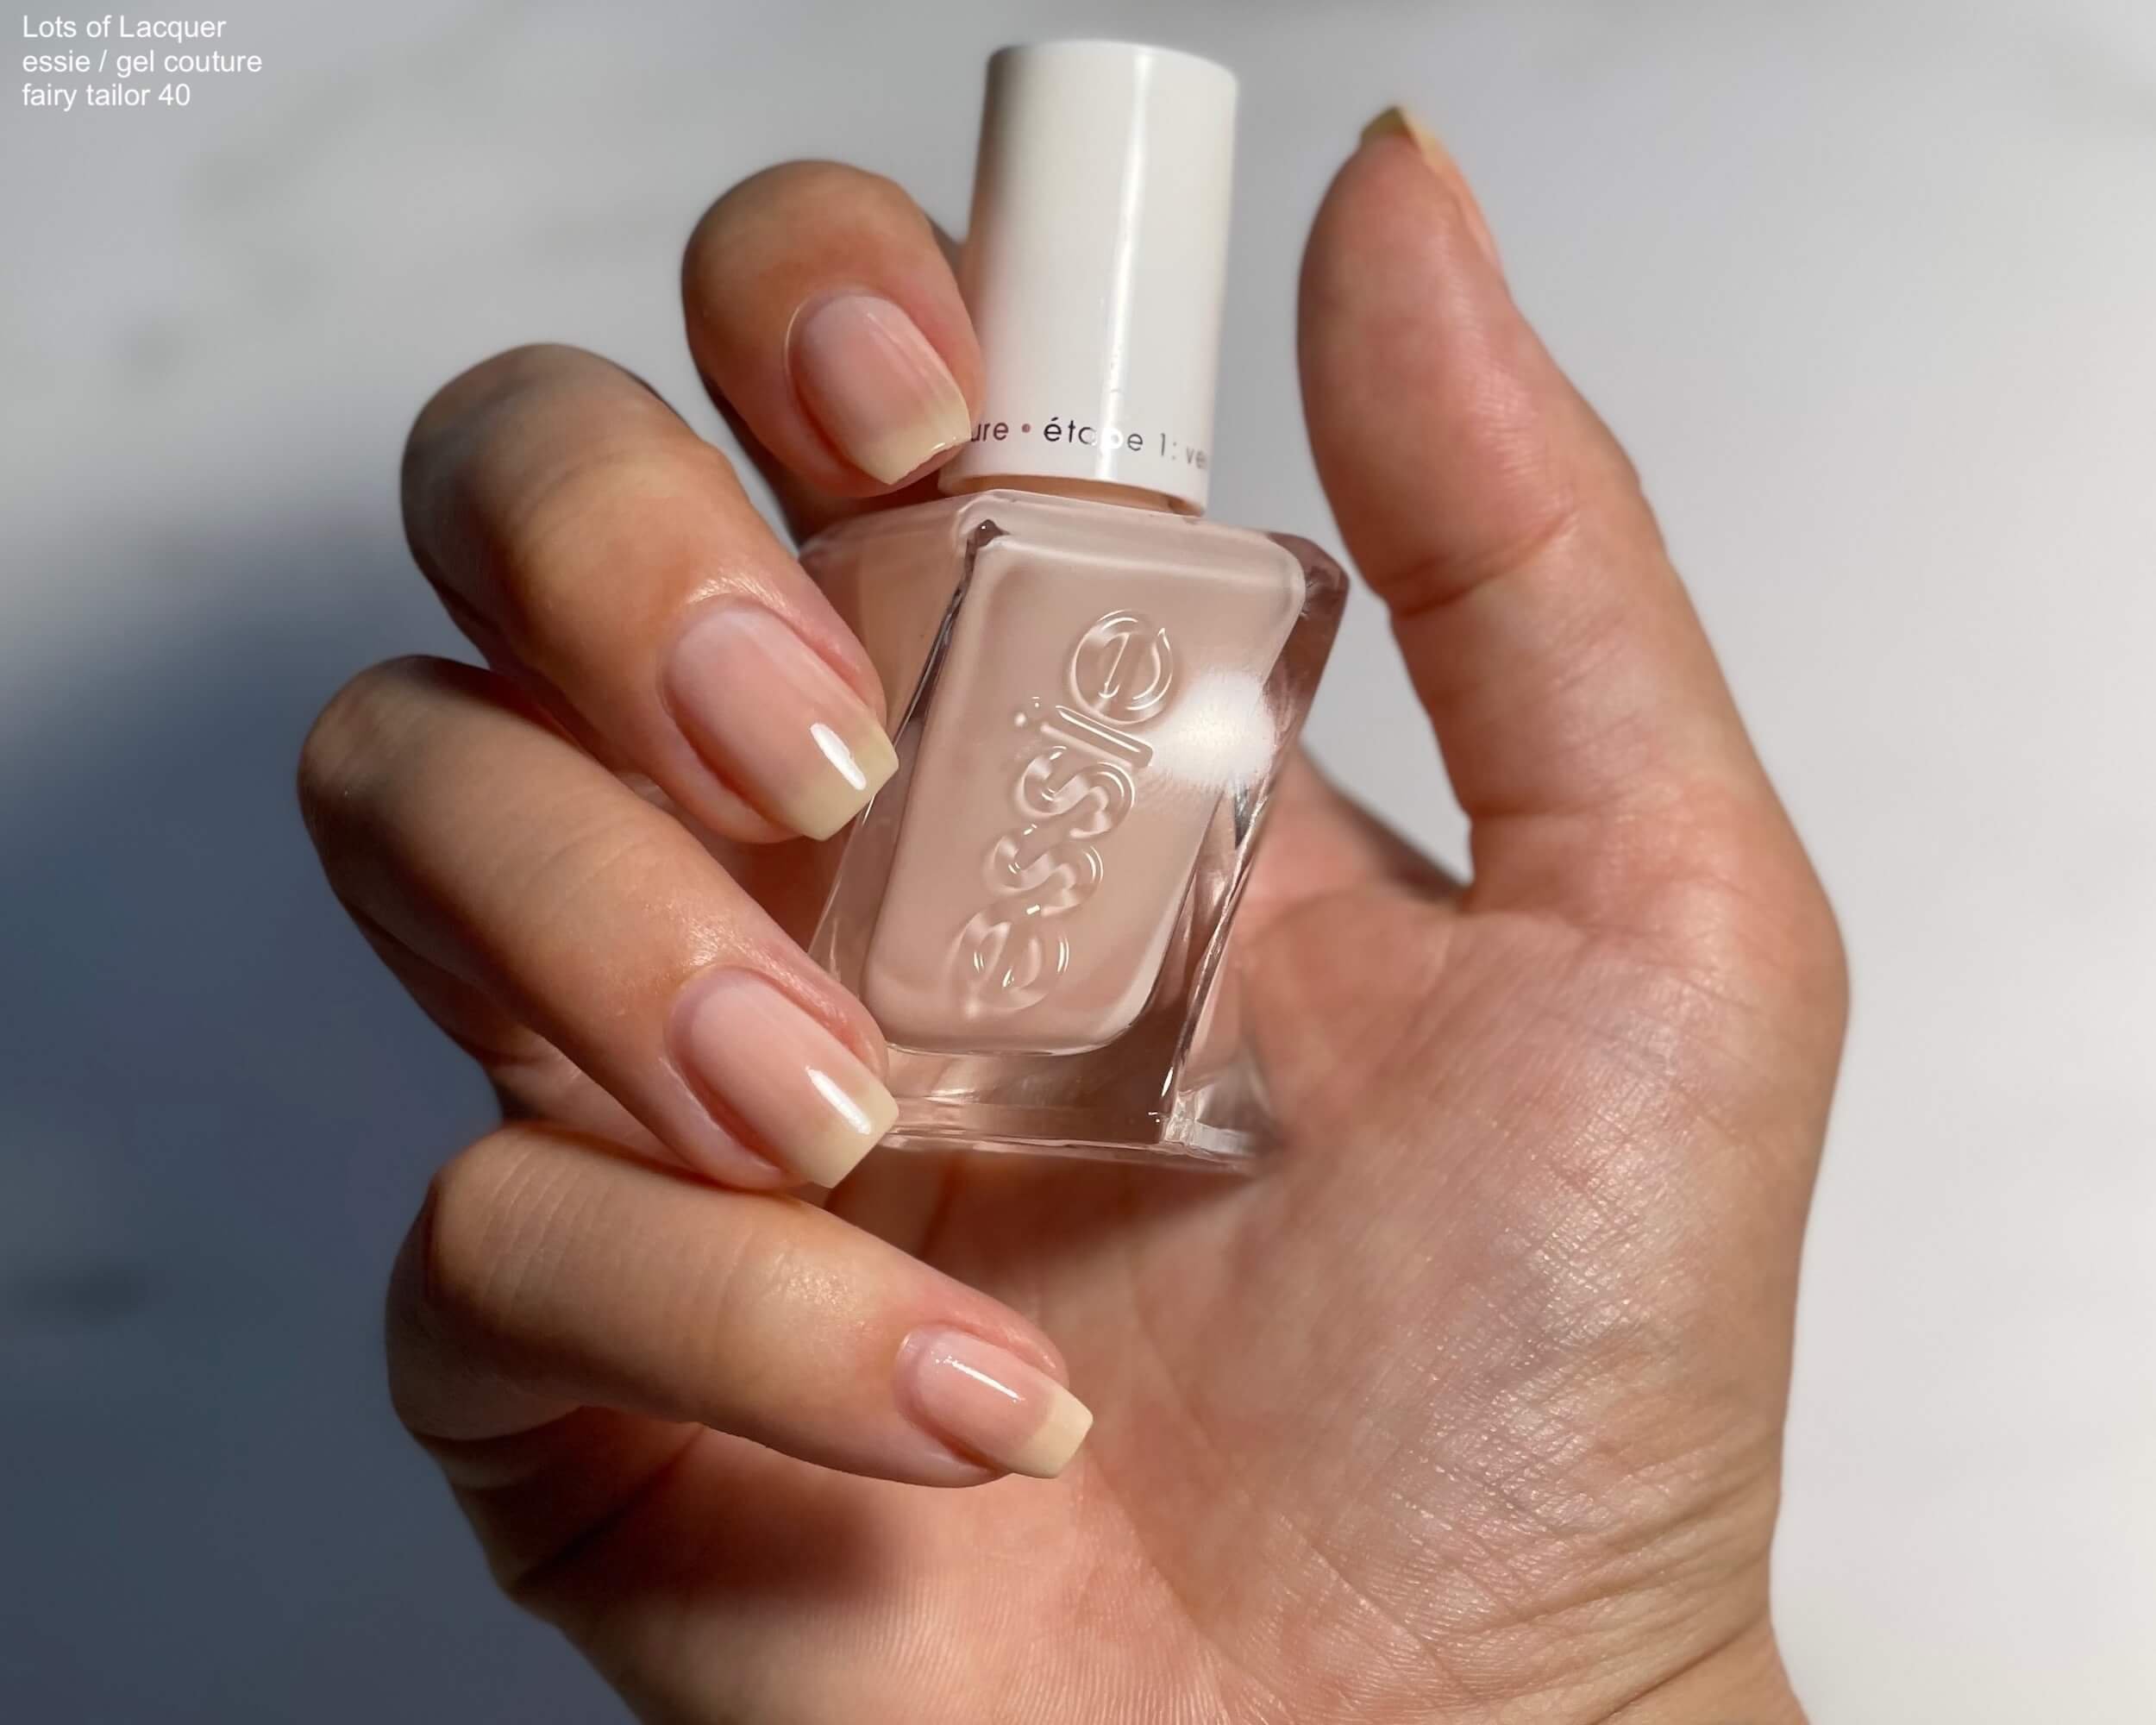 2. Essie Gel Couture in "Fairy Tailor" - wide 6